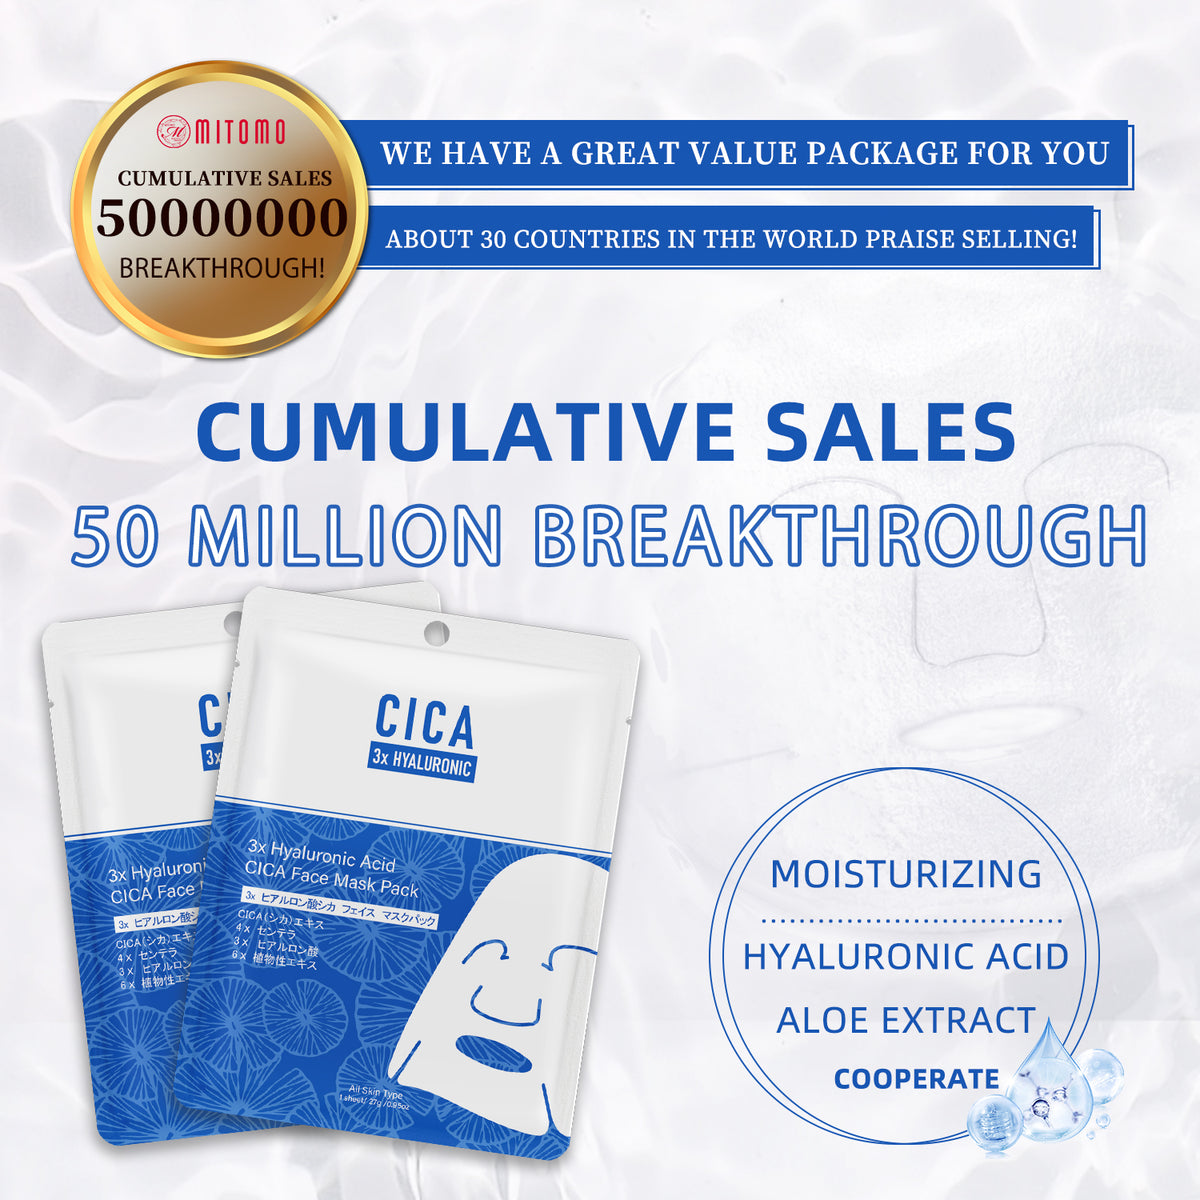 3x Hyaluronic Acid CICA Face Mask Pack [CCSS00001-B-027]